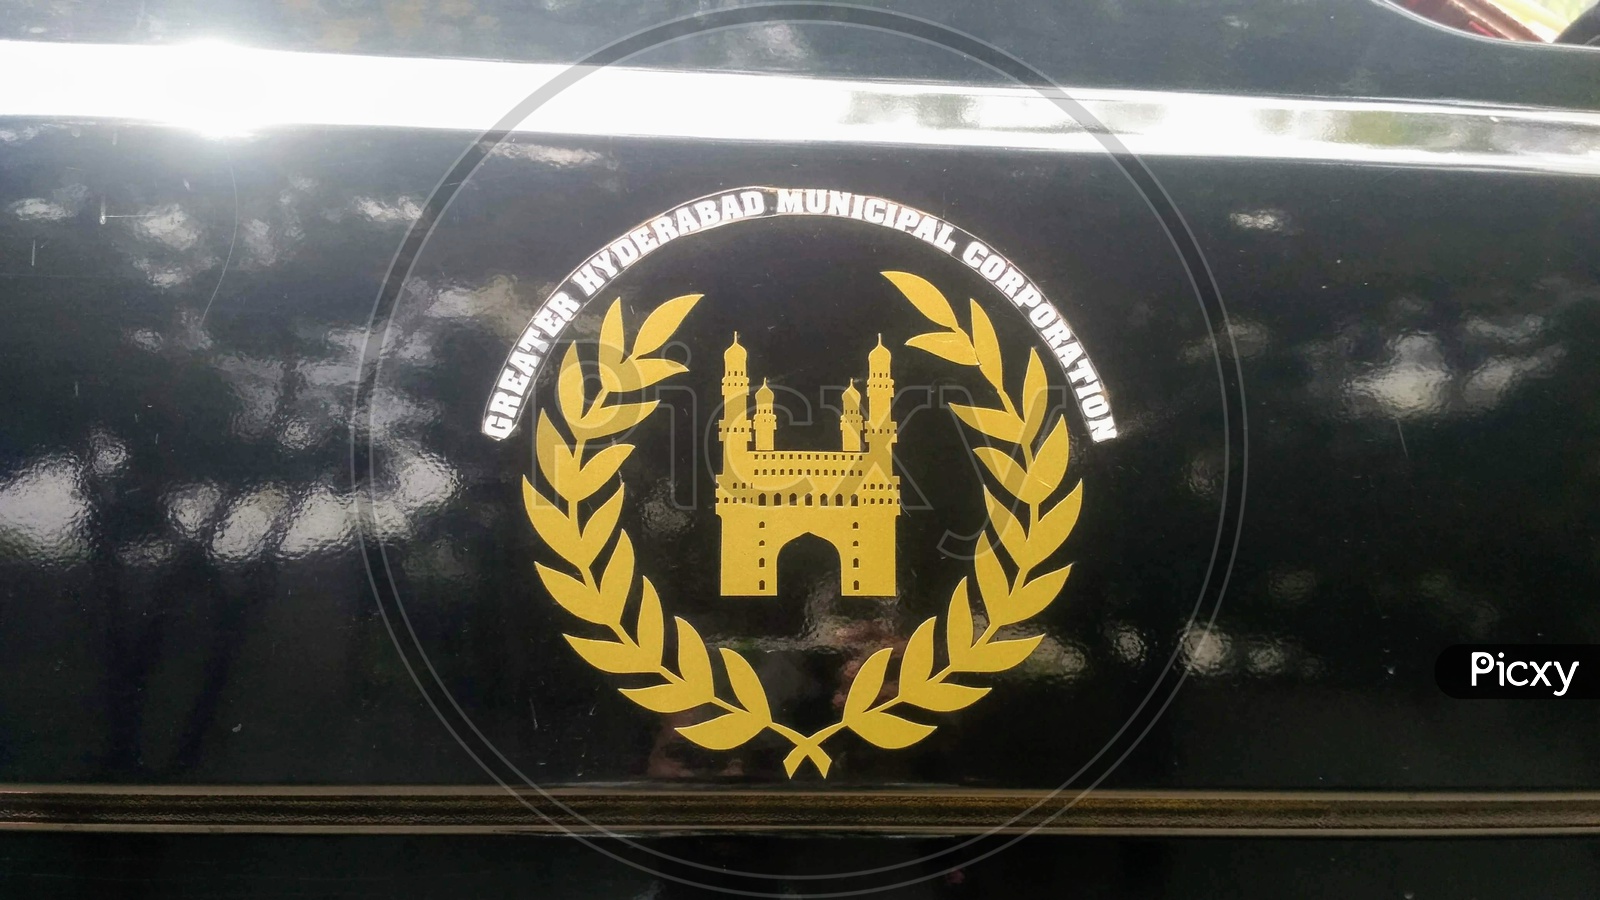 Disaster Response Force Truck Logo Hyderabad Telangana Maintained by Greater Hyderabad Municipal Corporation